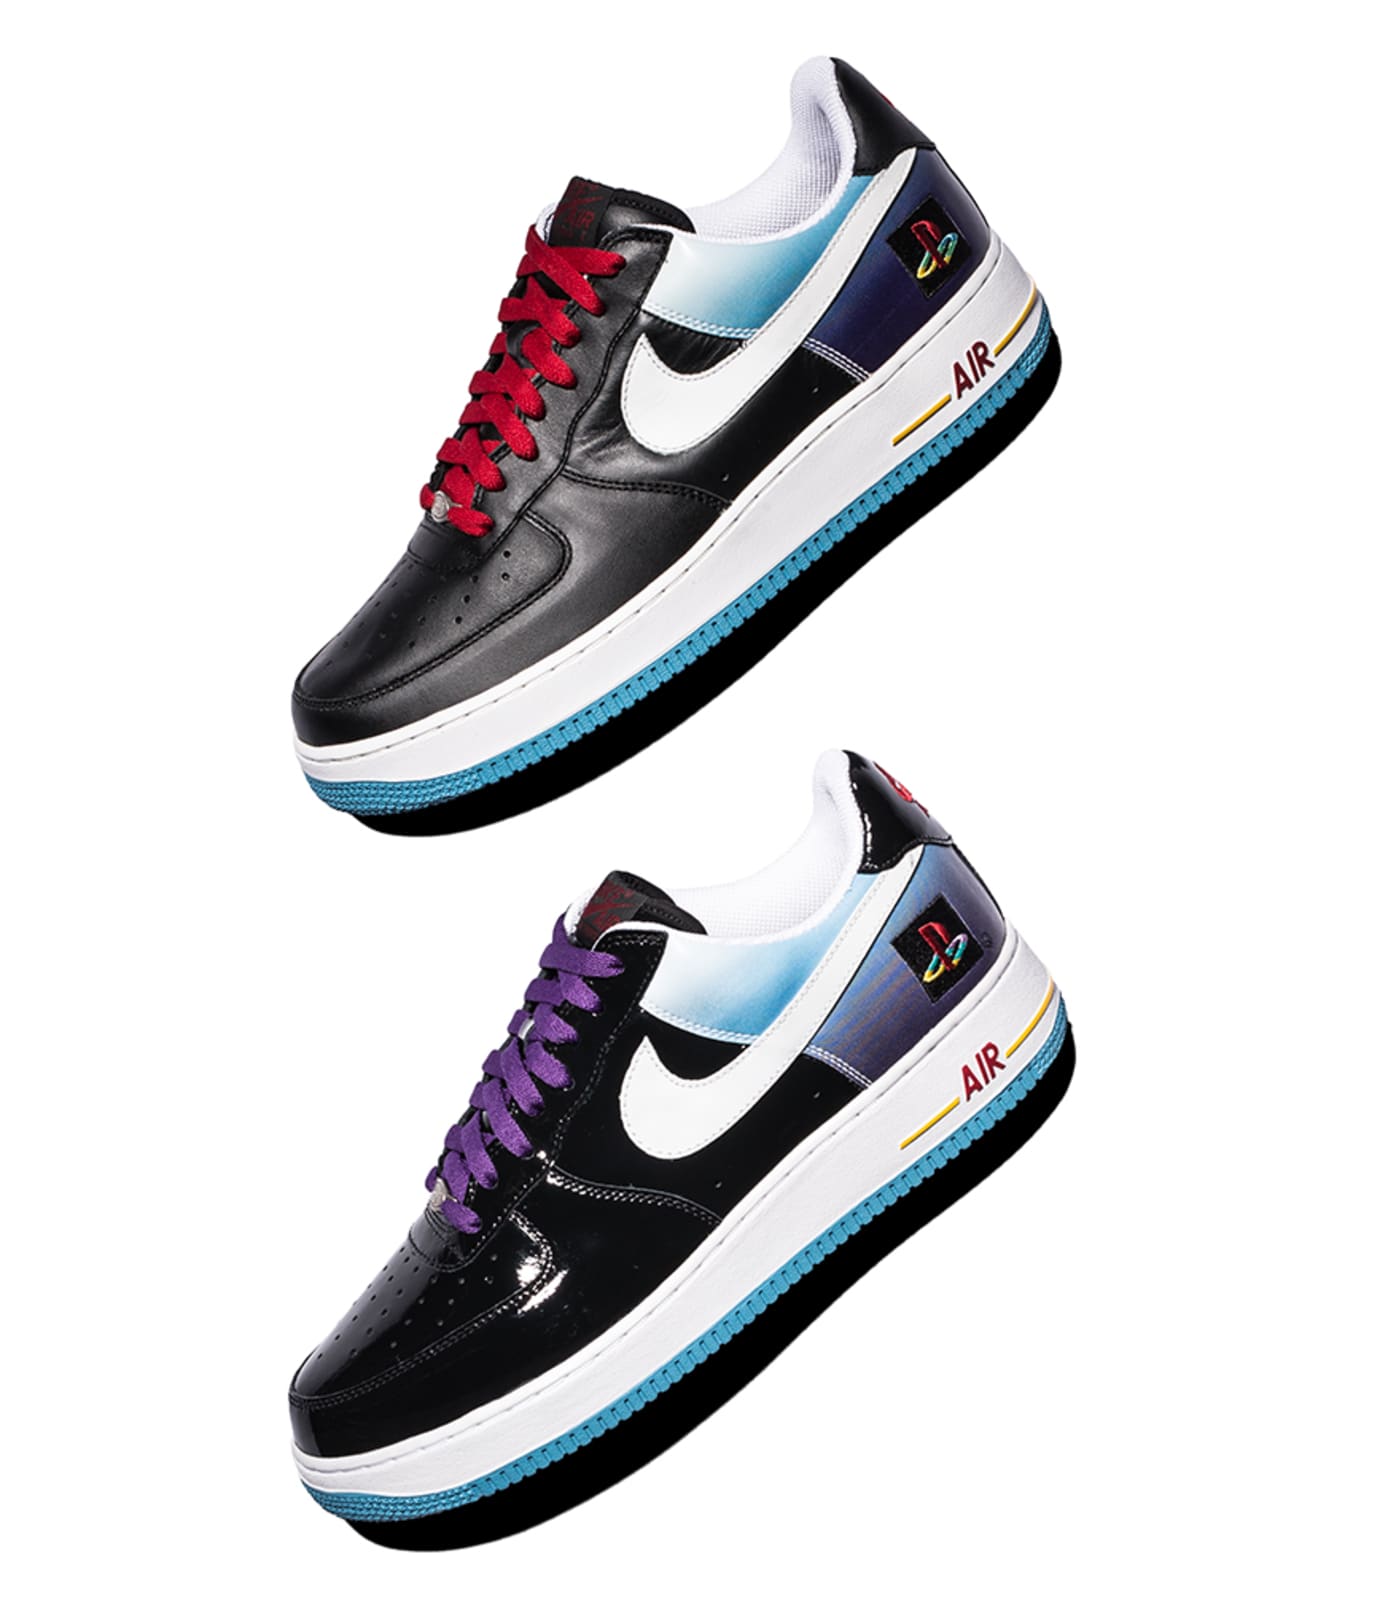 Playstation x Nike Air Force 1 Low (Premium Leather vs. Patent Leather)